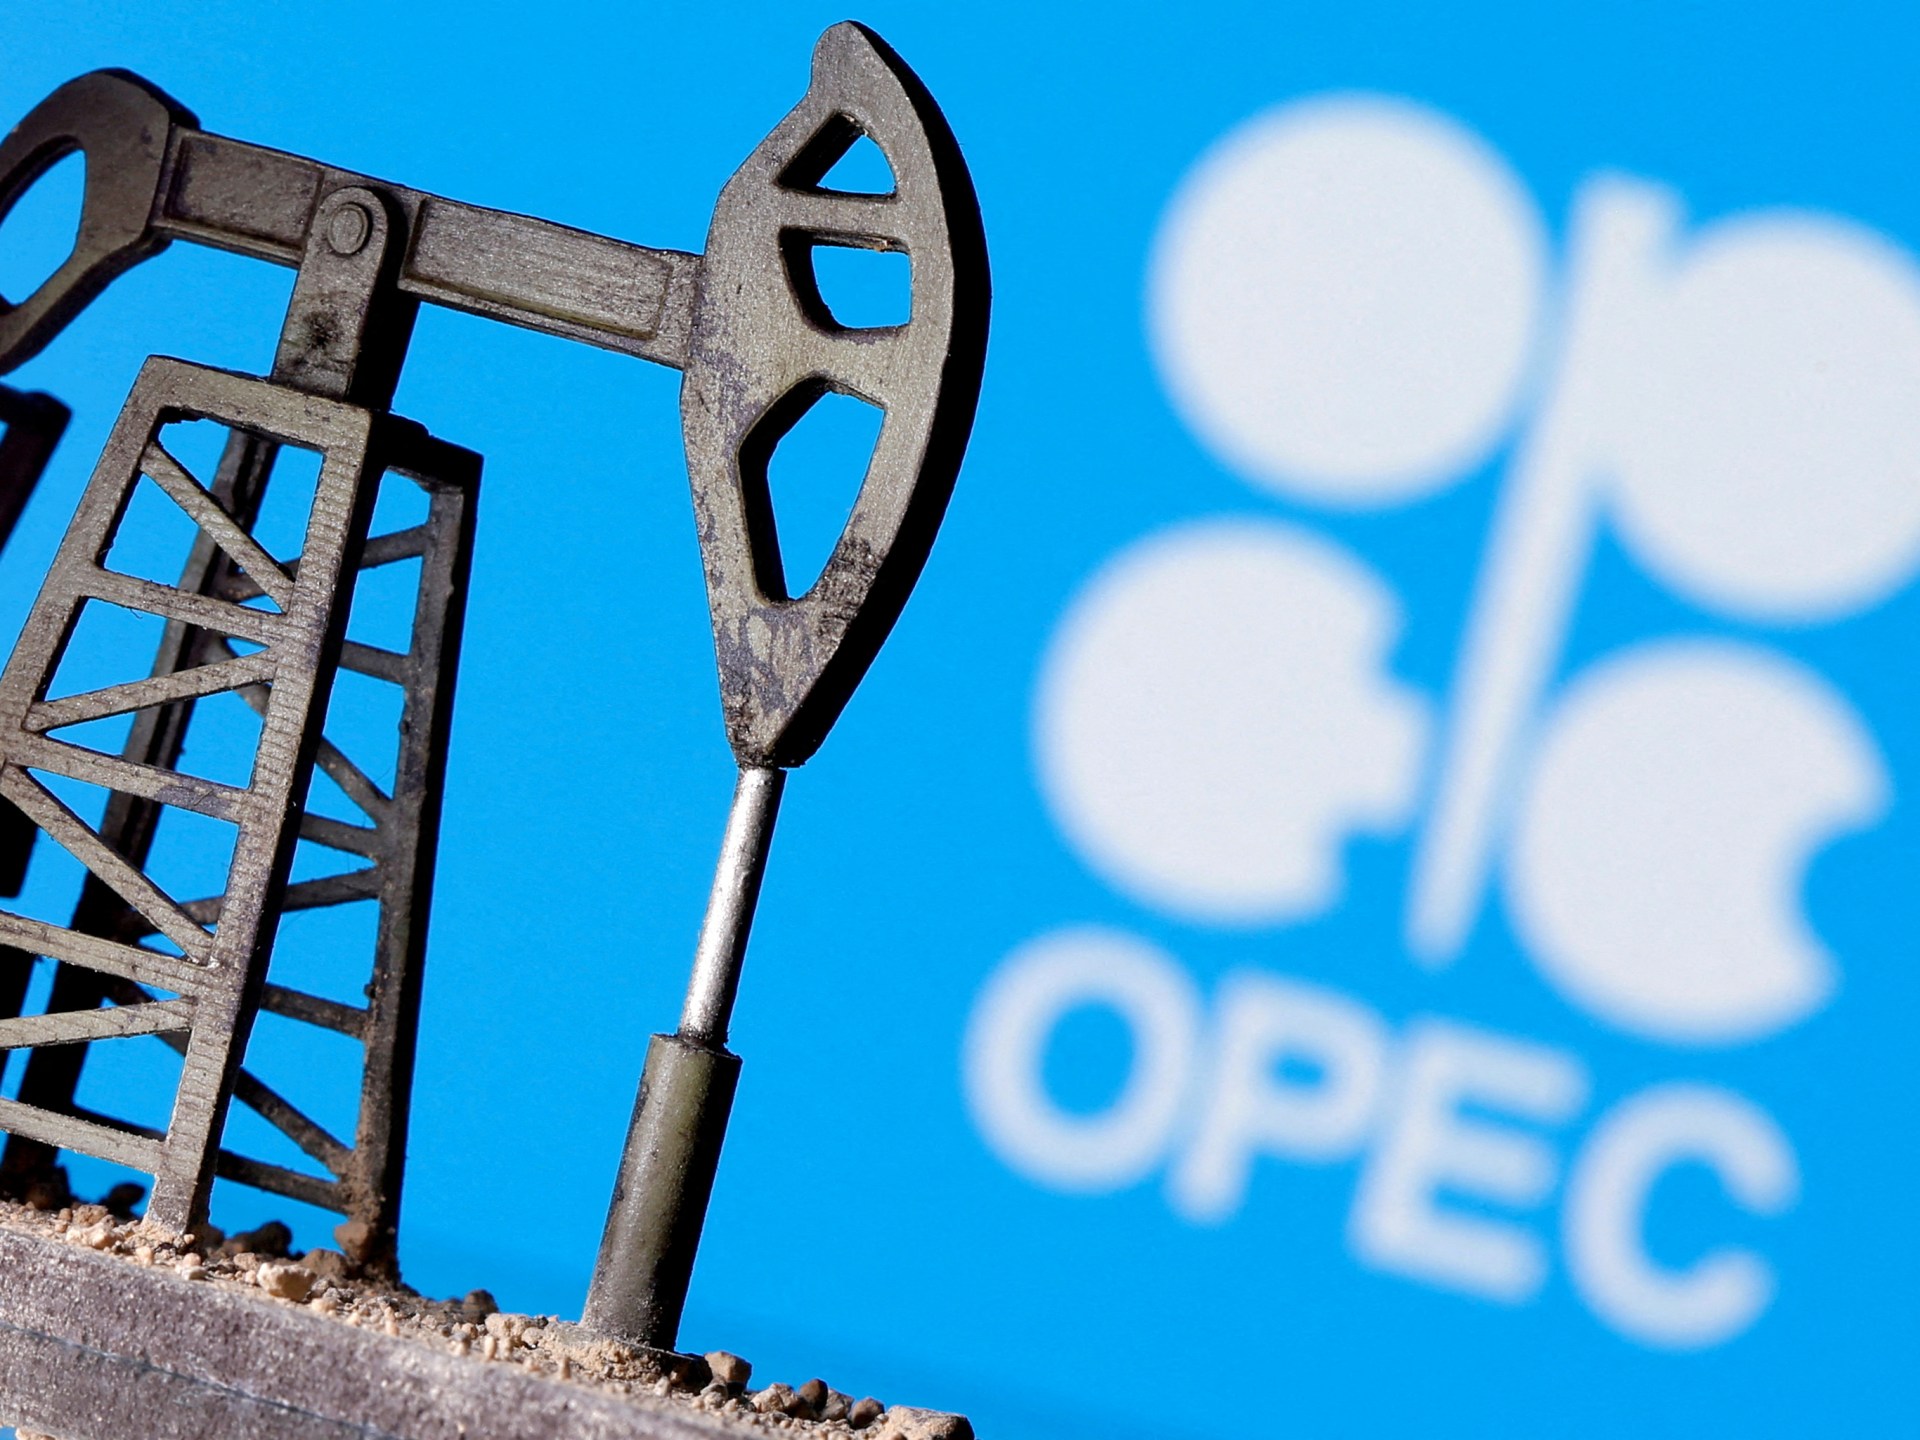 Angola to leave OPEC over disagreement on oil production quotas | OPEC News